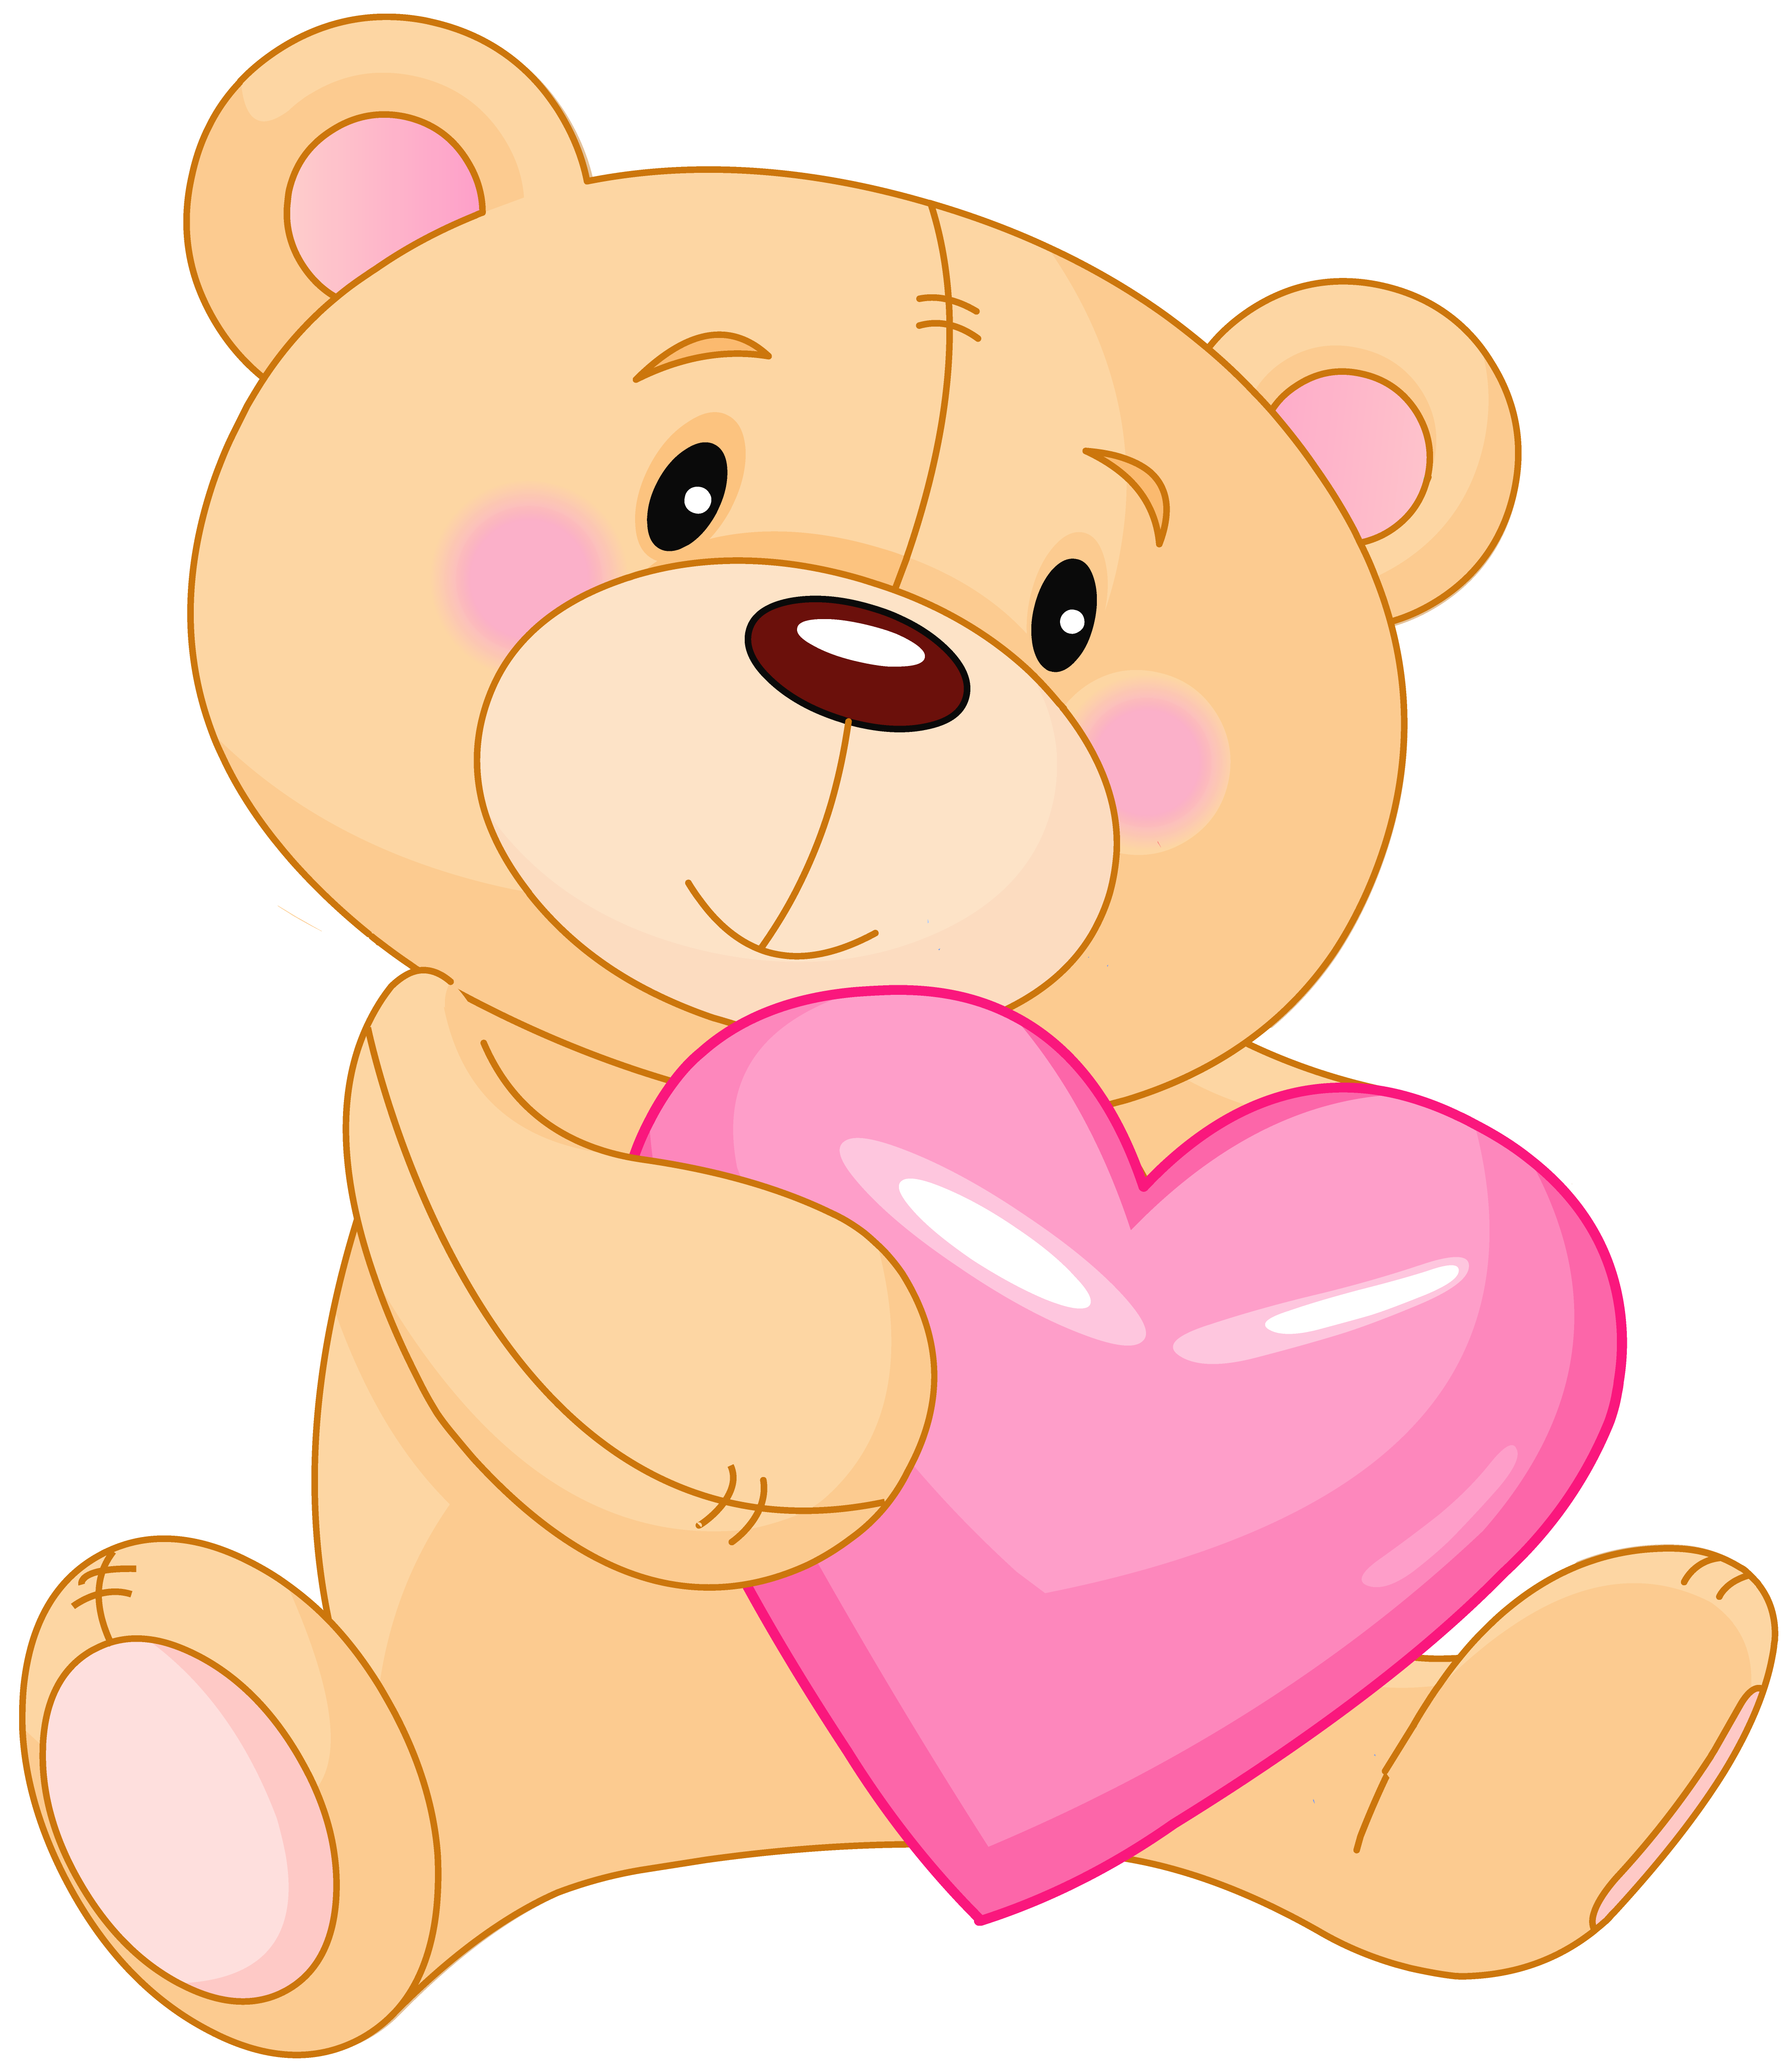 Transparent_Cute_Teddy_with_Pink_Heart_P